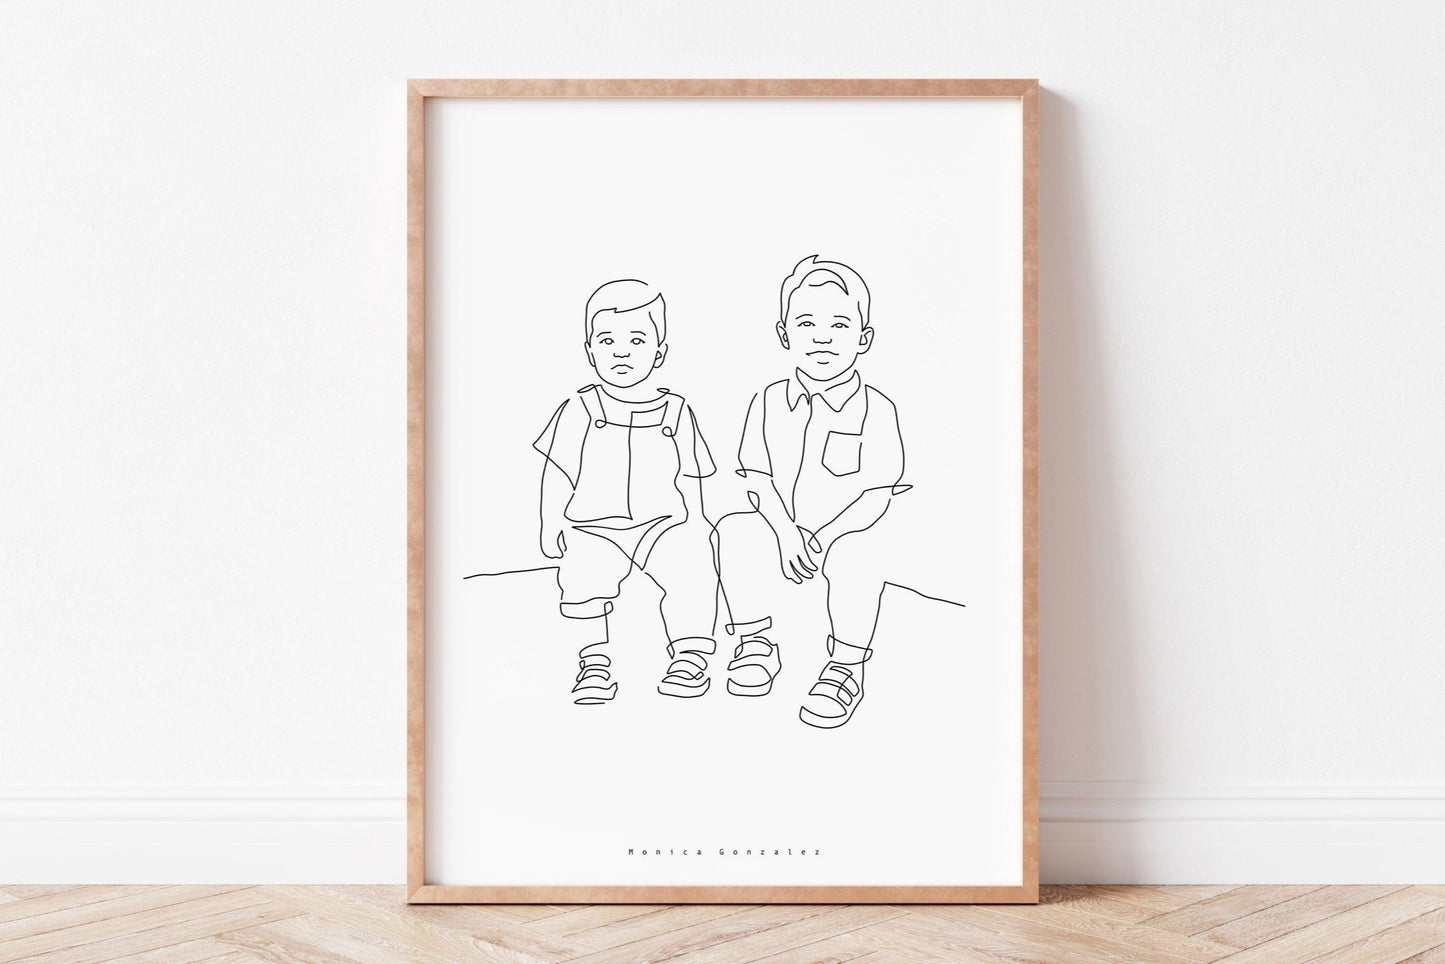 Line portrait of two kids smiling at the camera. Line art, minimalist illustration style